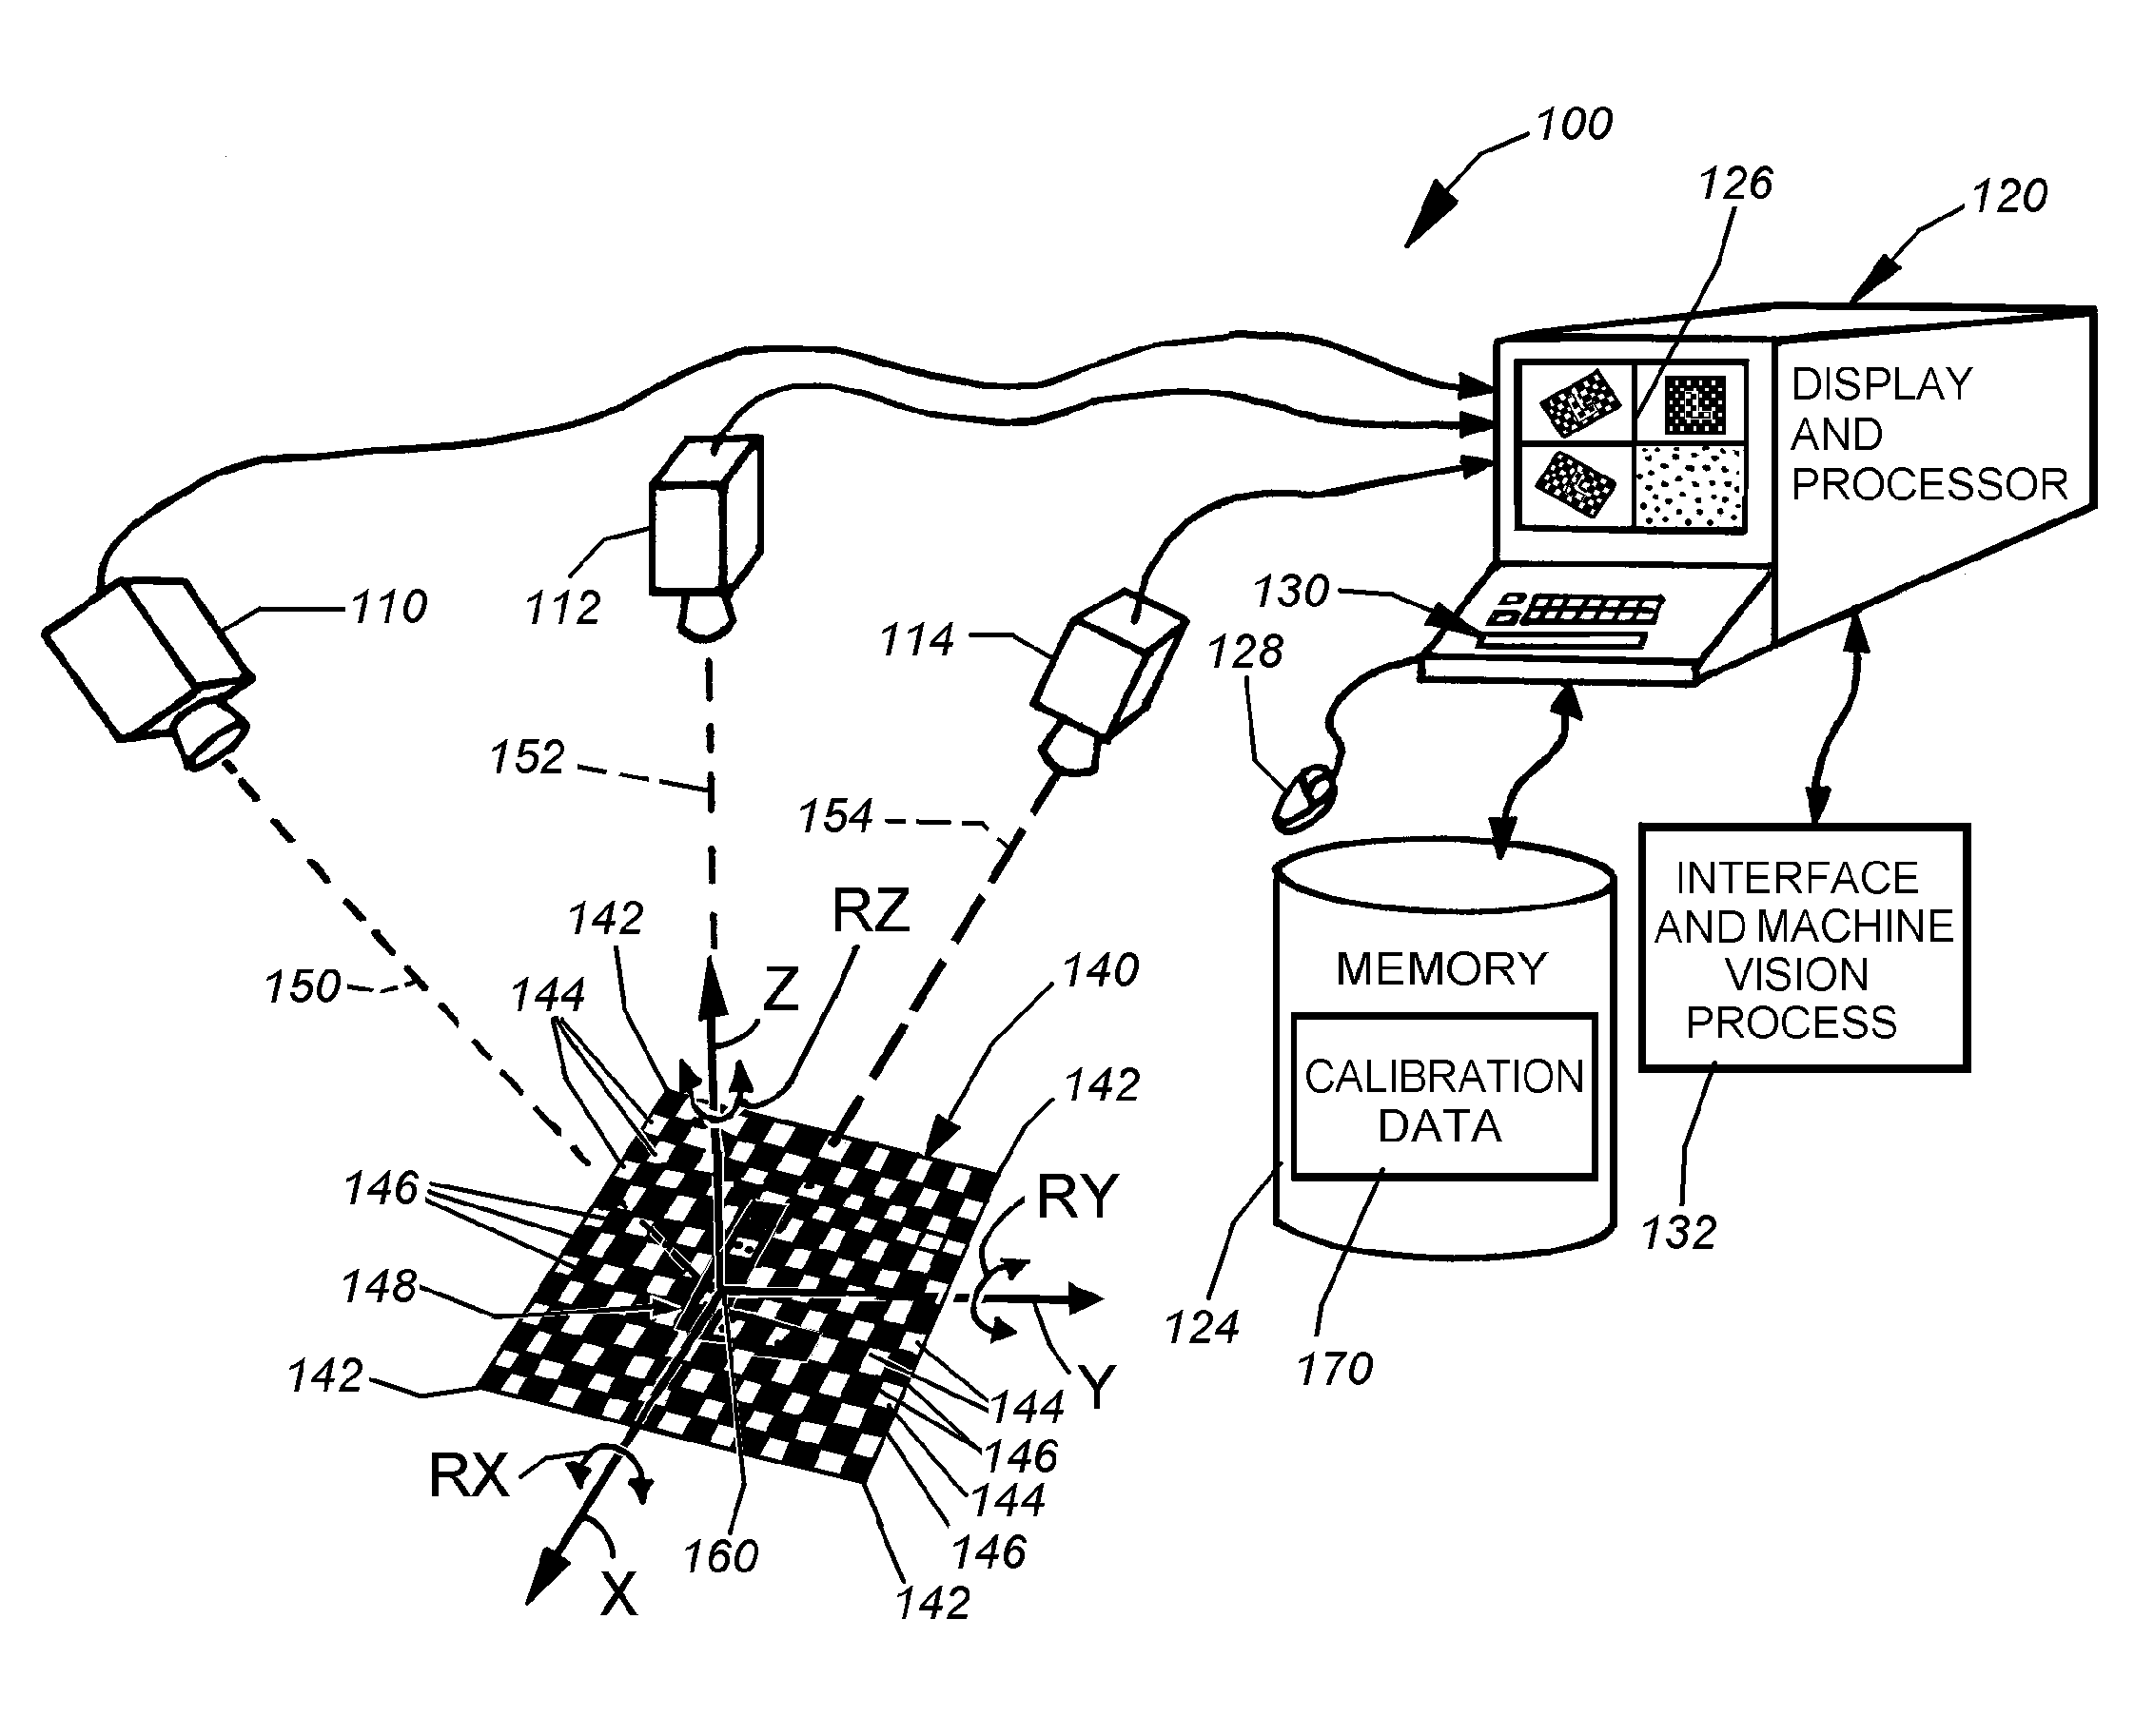 System and method for locating a three-dimensional object using machine vision